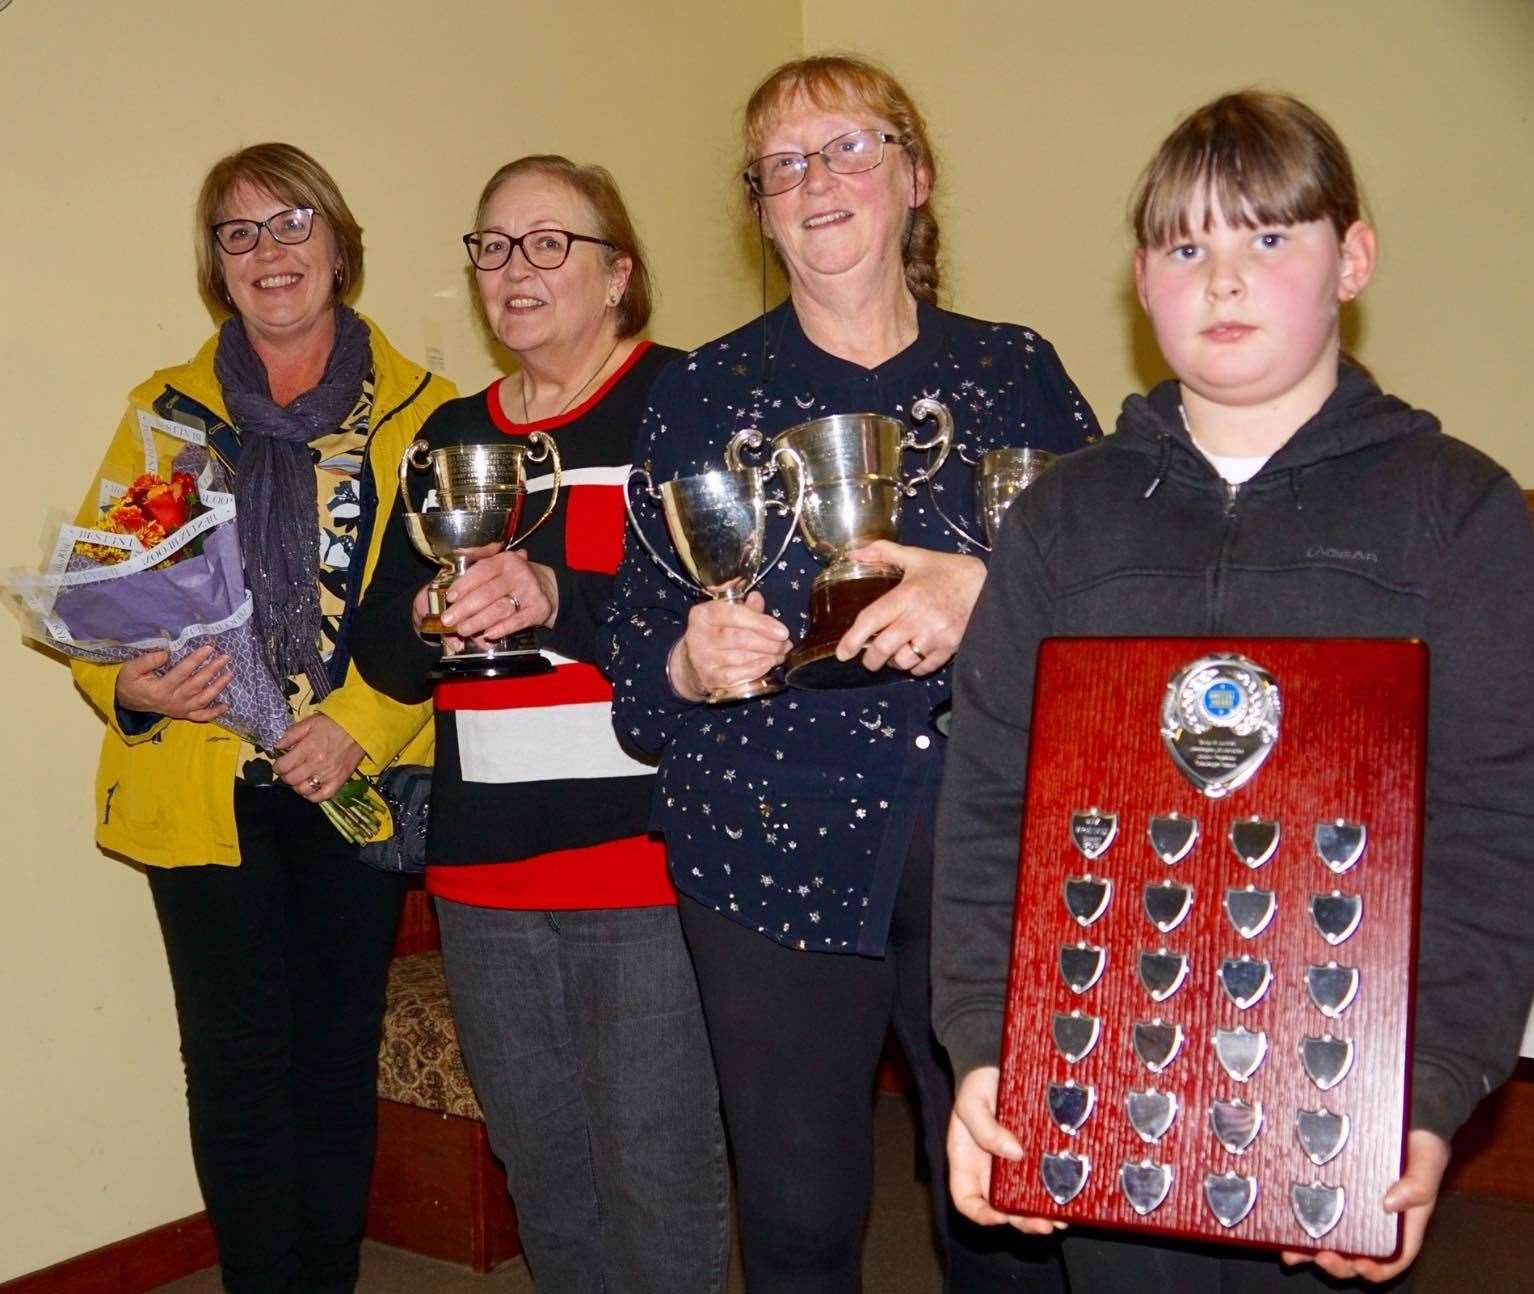 Audrey Mackay (left) presented the trophies to Suzanne Tomlinson, Anne Bertram and Bethany Seddon.